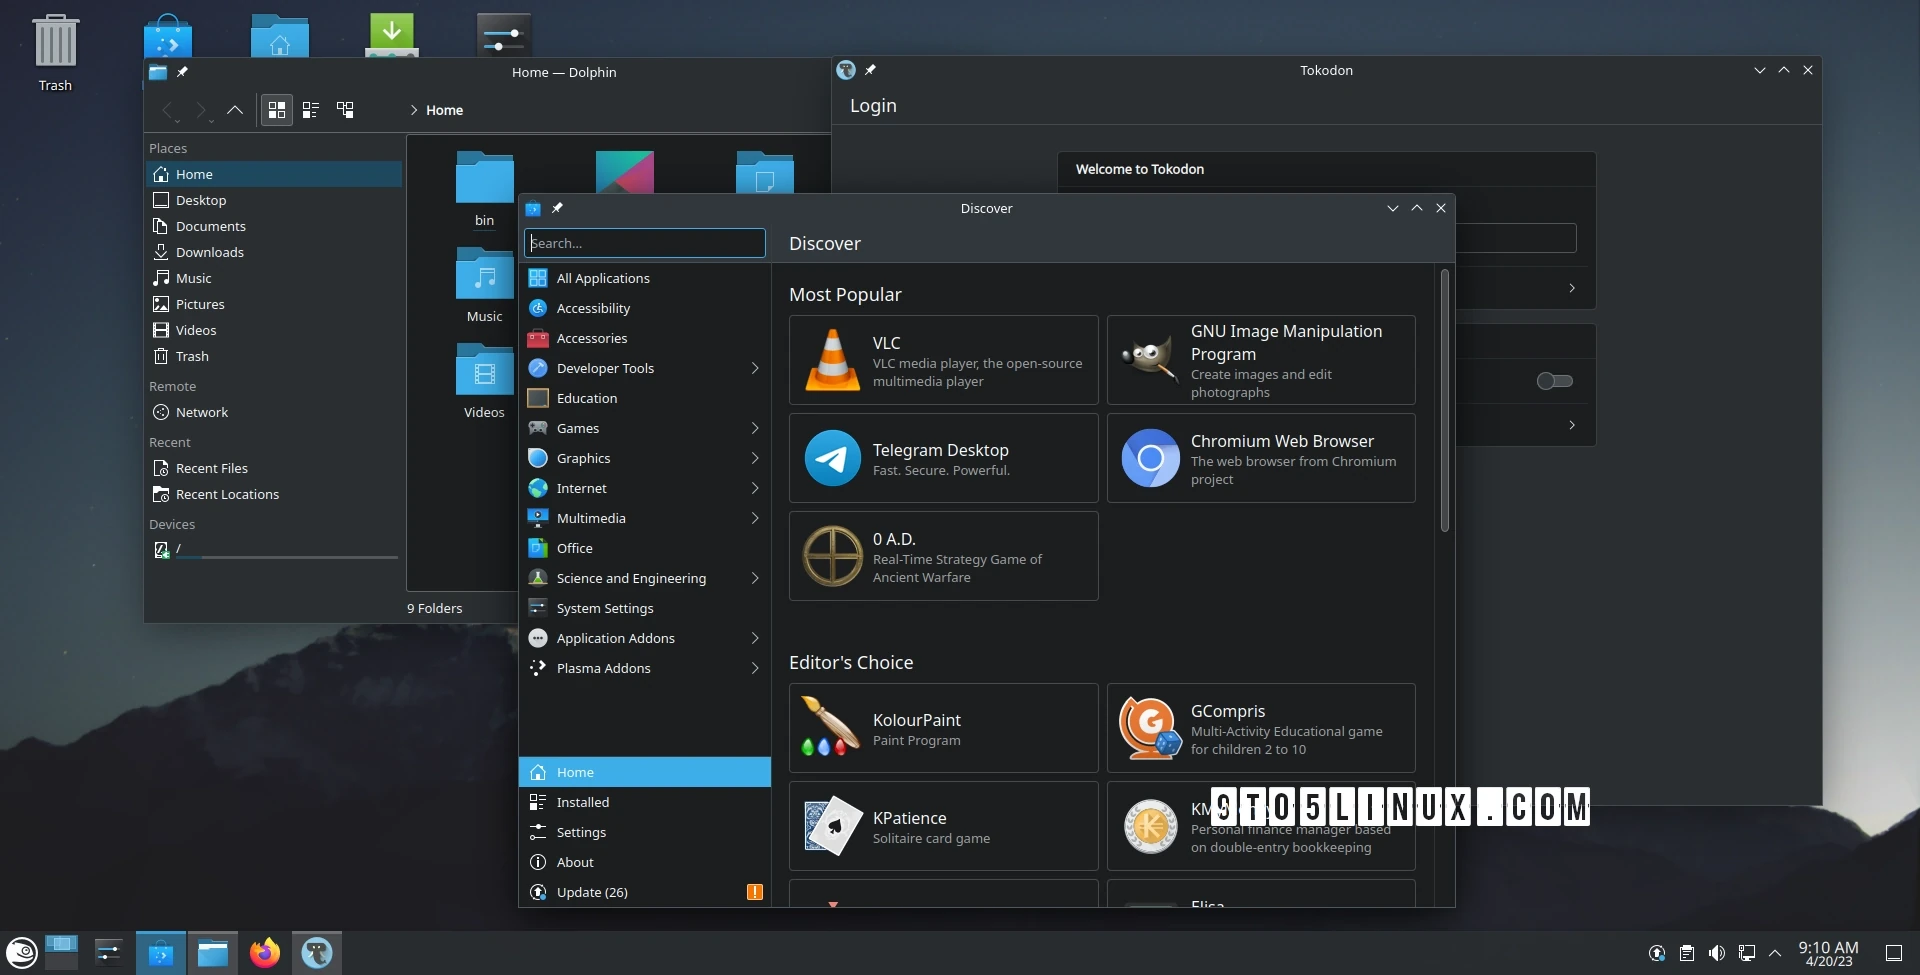 KDE Gear 23.04.1 Is Out to Improve Kdenlive, Spectacle, Dolphin, and More